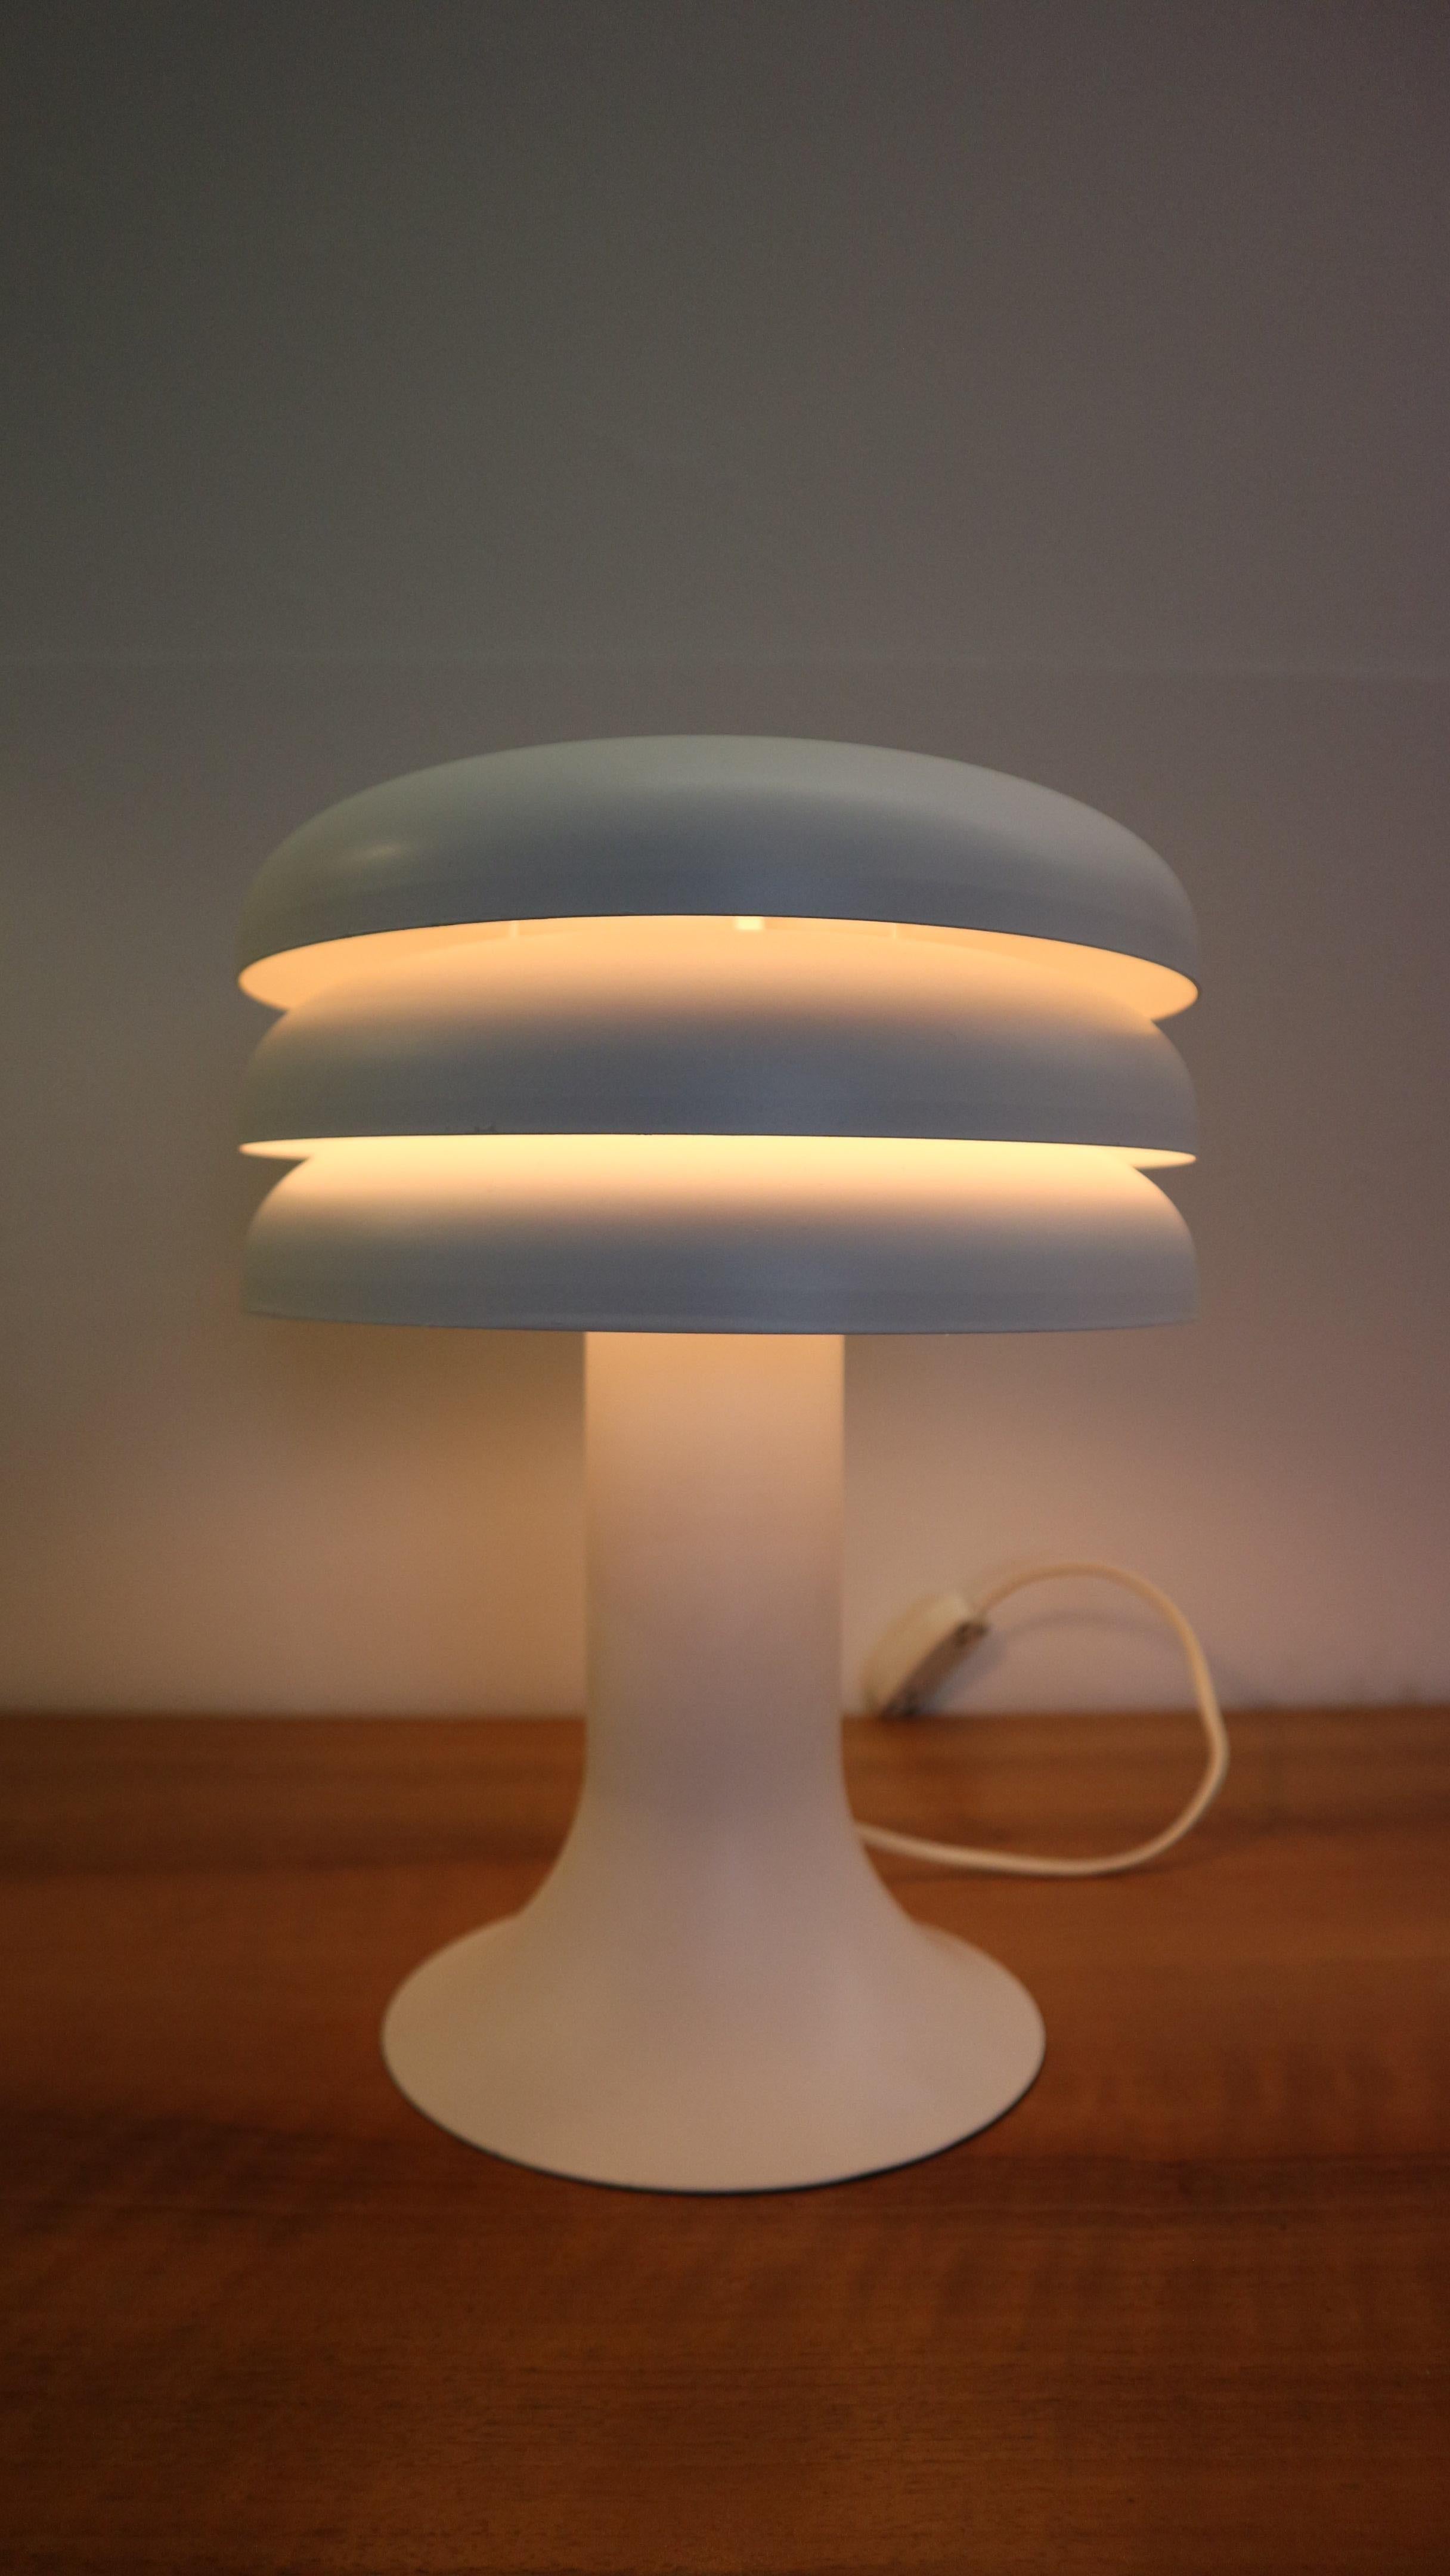 An iconic piece of Mid-century design lighting. This table lamp, model BN-25, is a recognizable design by popular Swedish designer Hans Agne Jakobsson. It is made of high quality white lacquered aluminium. The top is made of three round parts with a